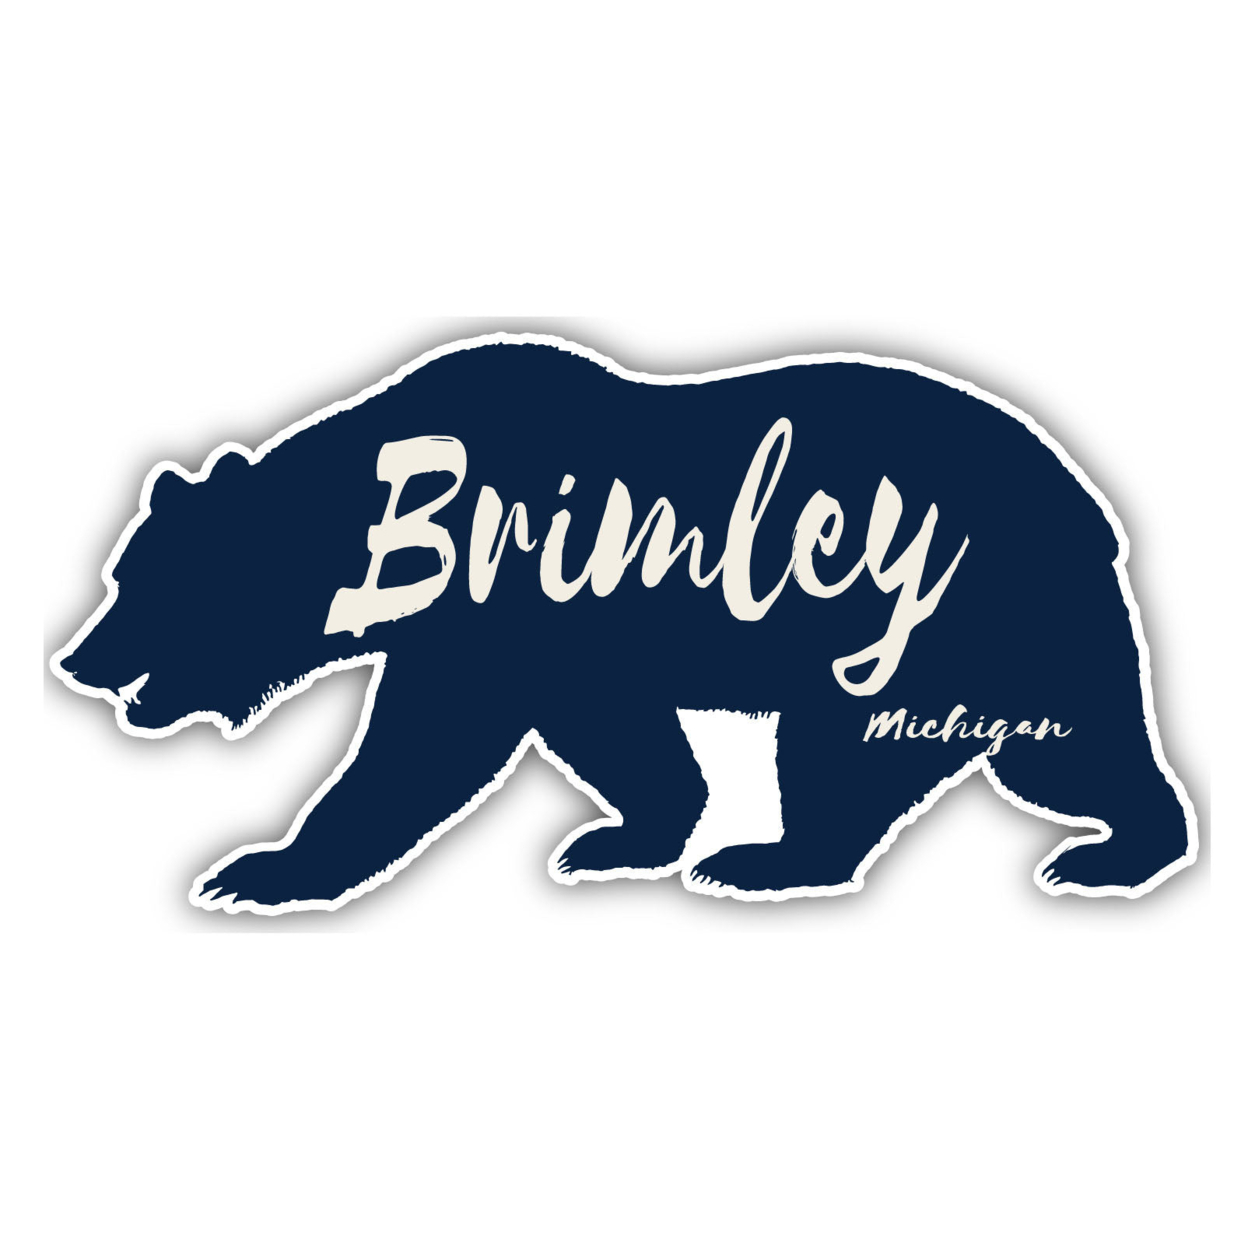 Brimley Michigan Souvenir Decorative Stickers (Choose Theme And Size) - Single Unit, 6-Inch, Great Outdoors